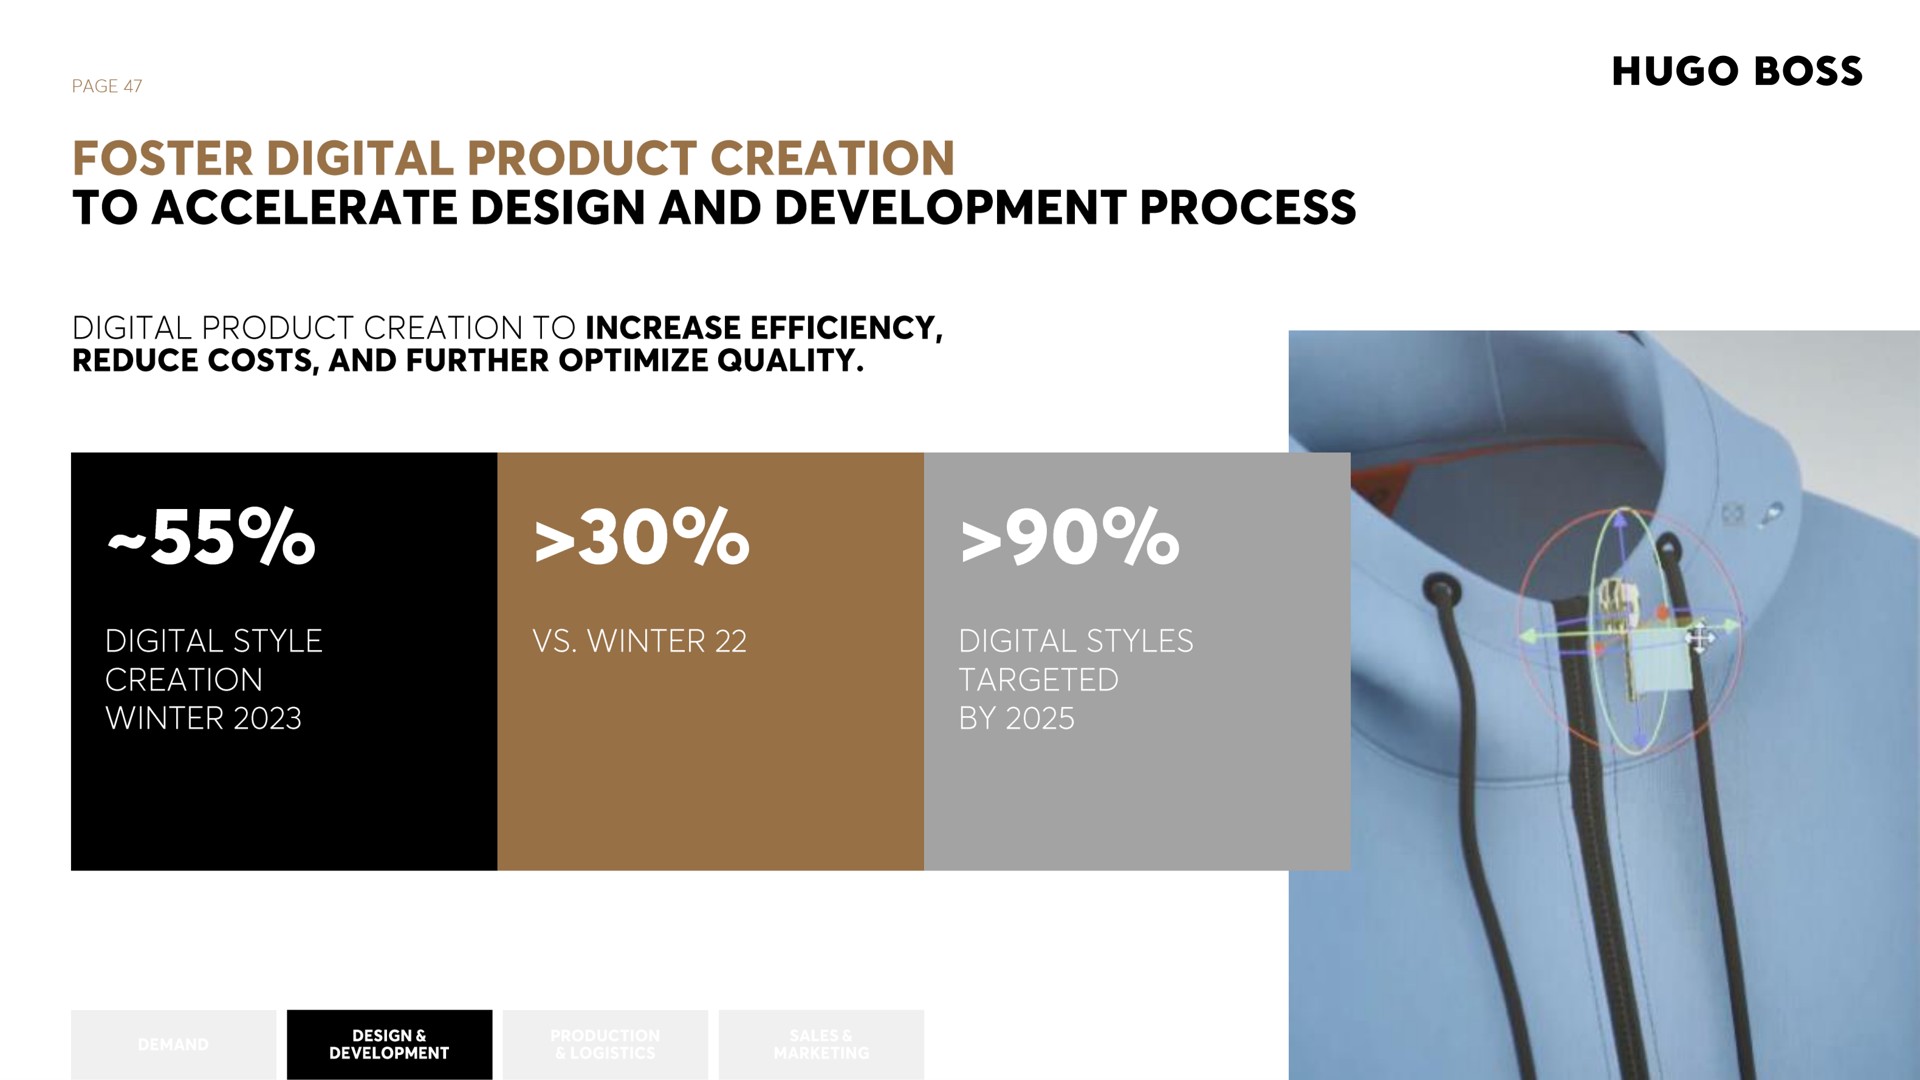 page boss foster digital product creation to accelerate design and development process digital product creation to increase efficiency reduce costs and further optimize quality digital style creation winter winter digital styles targeted by | Hugo Boss